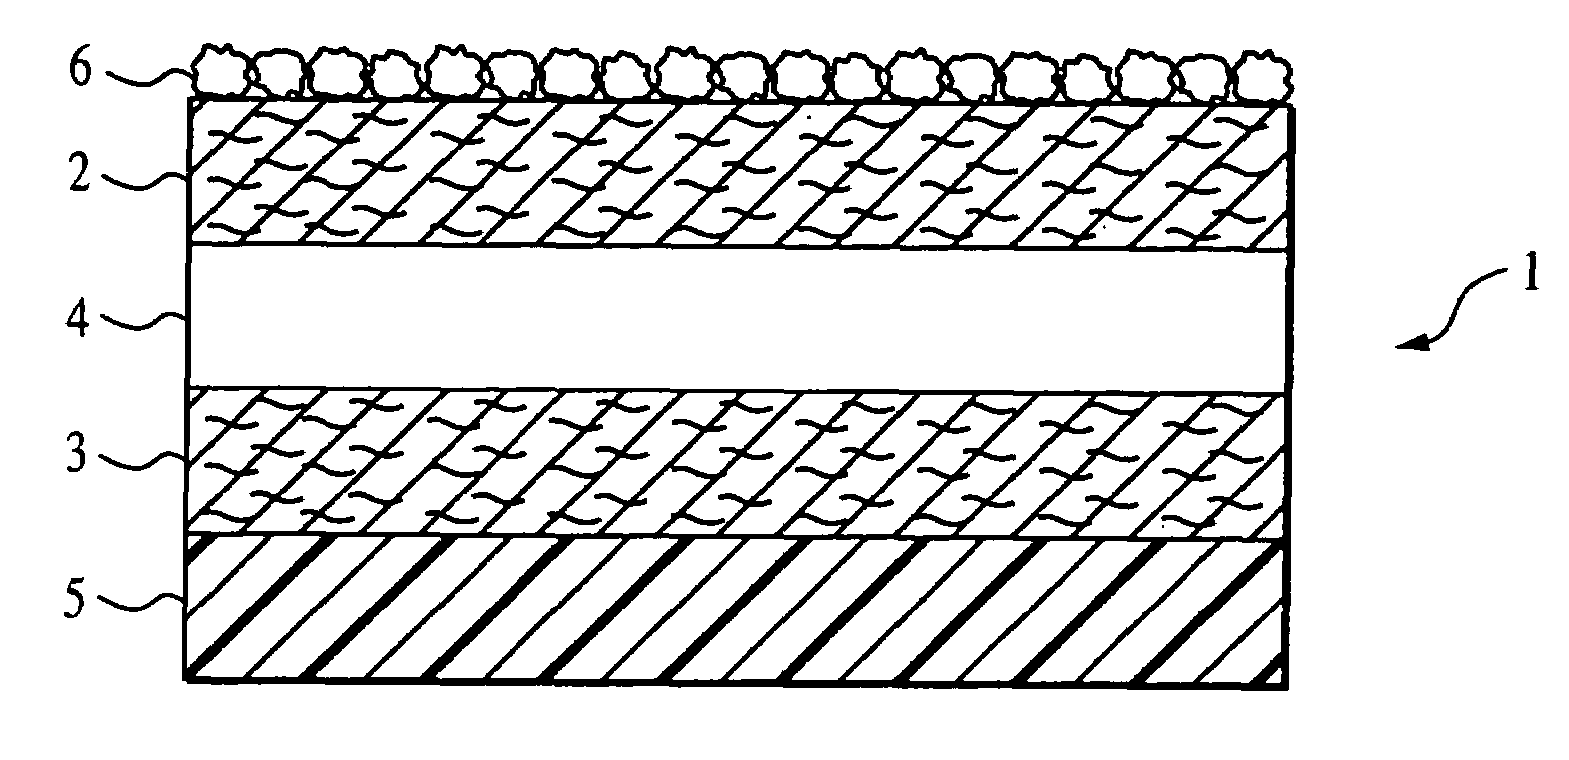 Impact resistant roofing shingles and process of making same